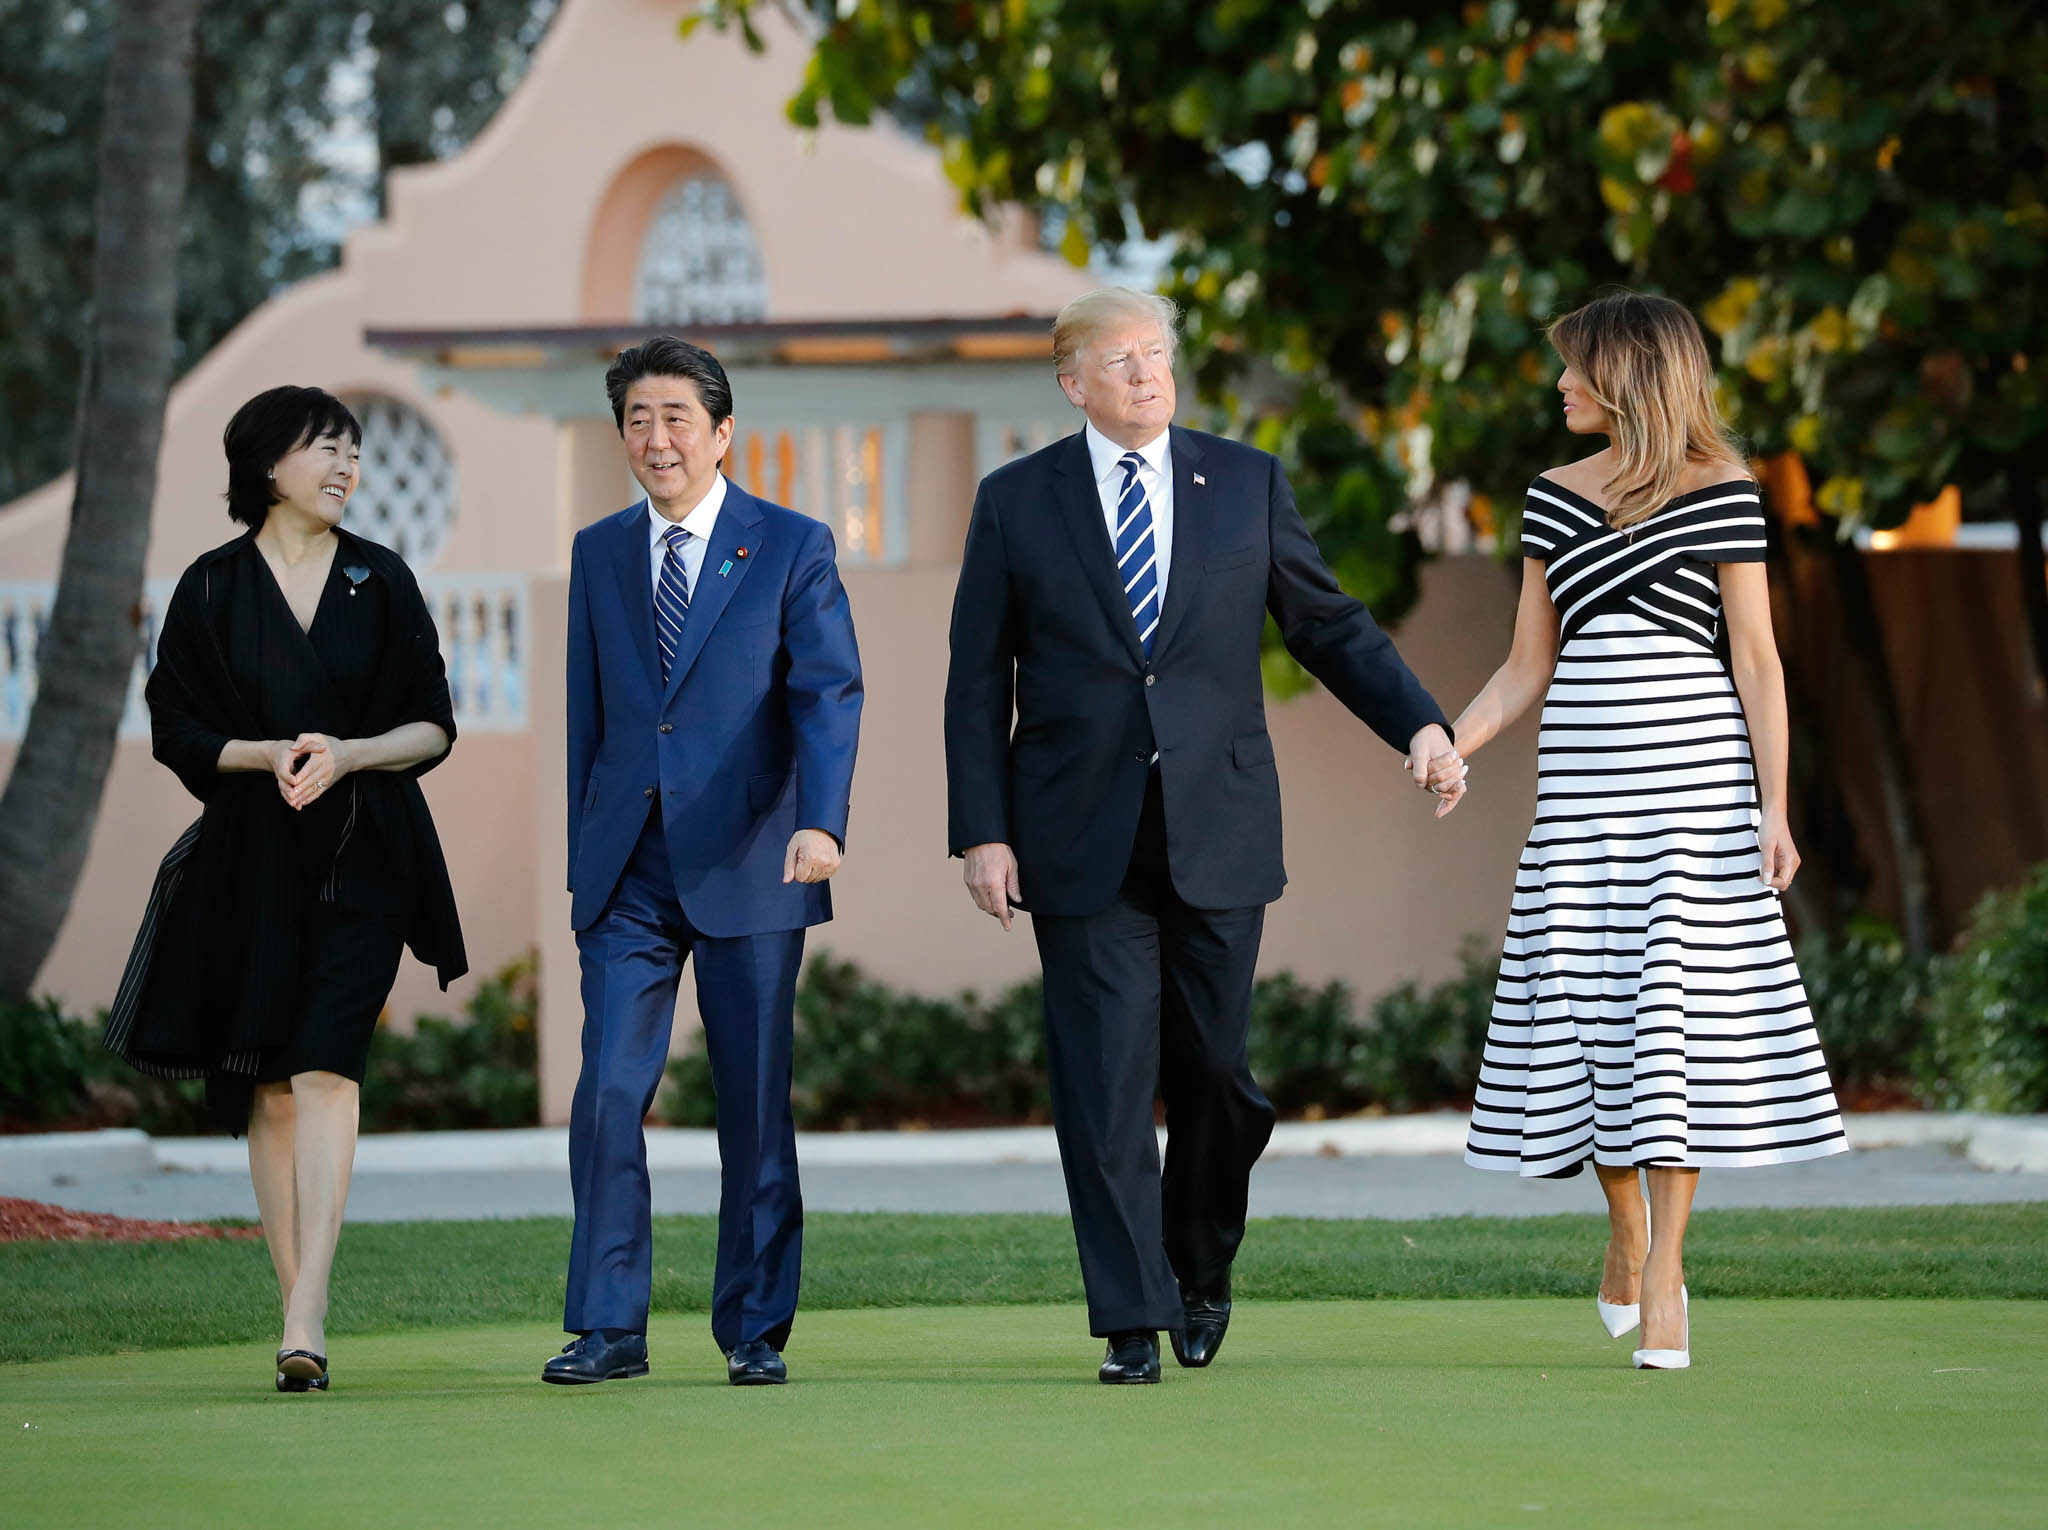 Japan’s prime minister and his wife, Akie Abe, with the U.S. president and his wife, Melania, at Trump’s private club in Florida. (© Pablo Martinez Monsivais/AP Images)